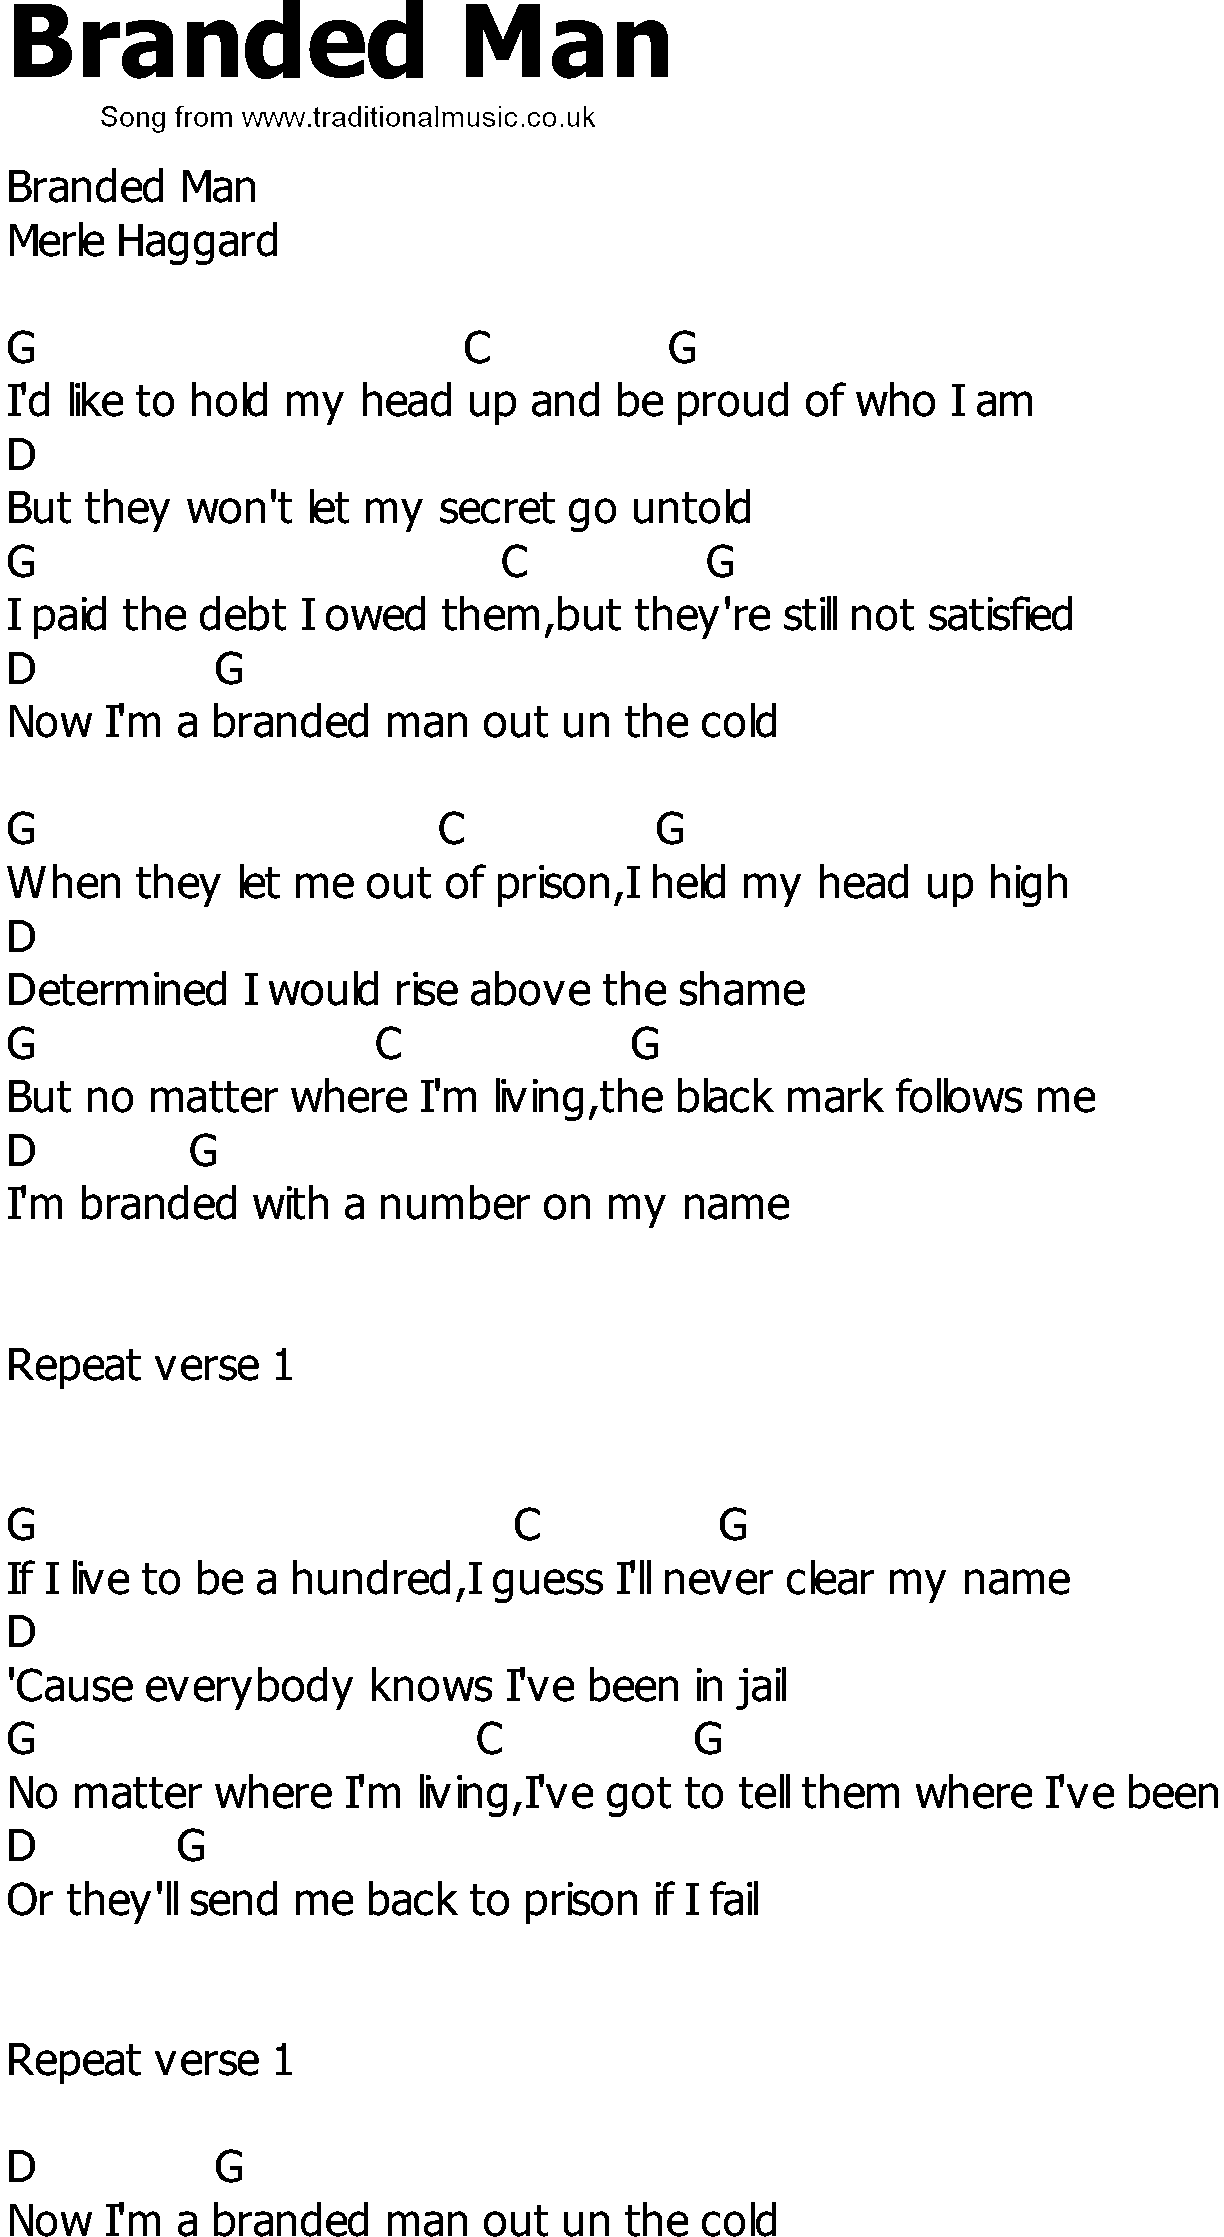 Old Country song lyrics with chords - Branded Man